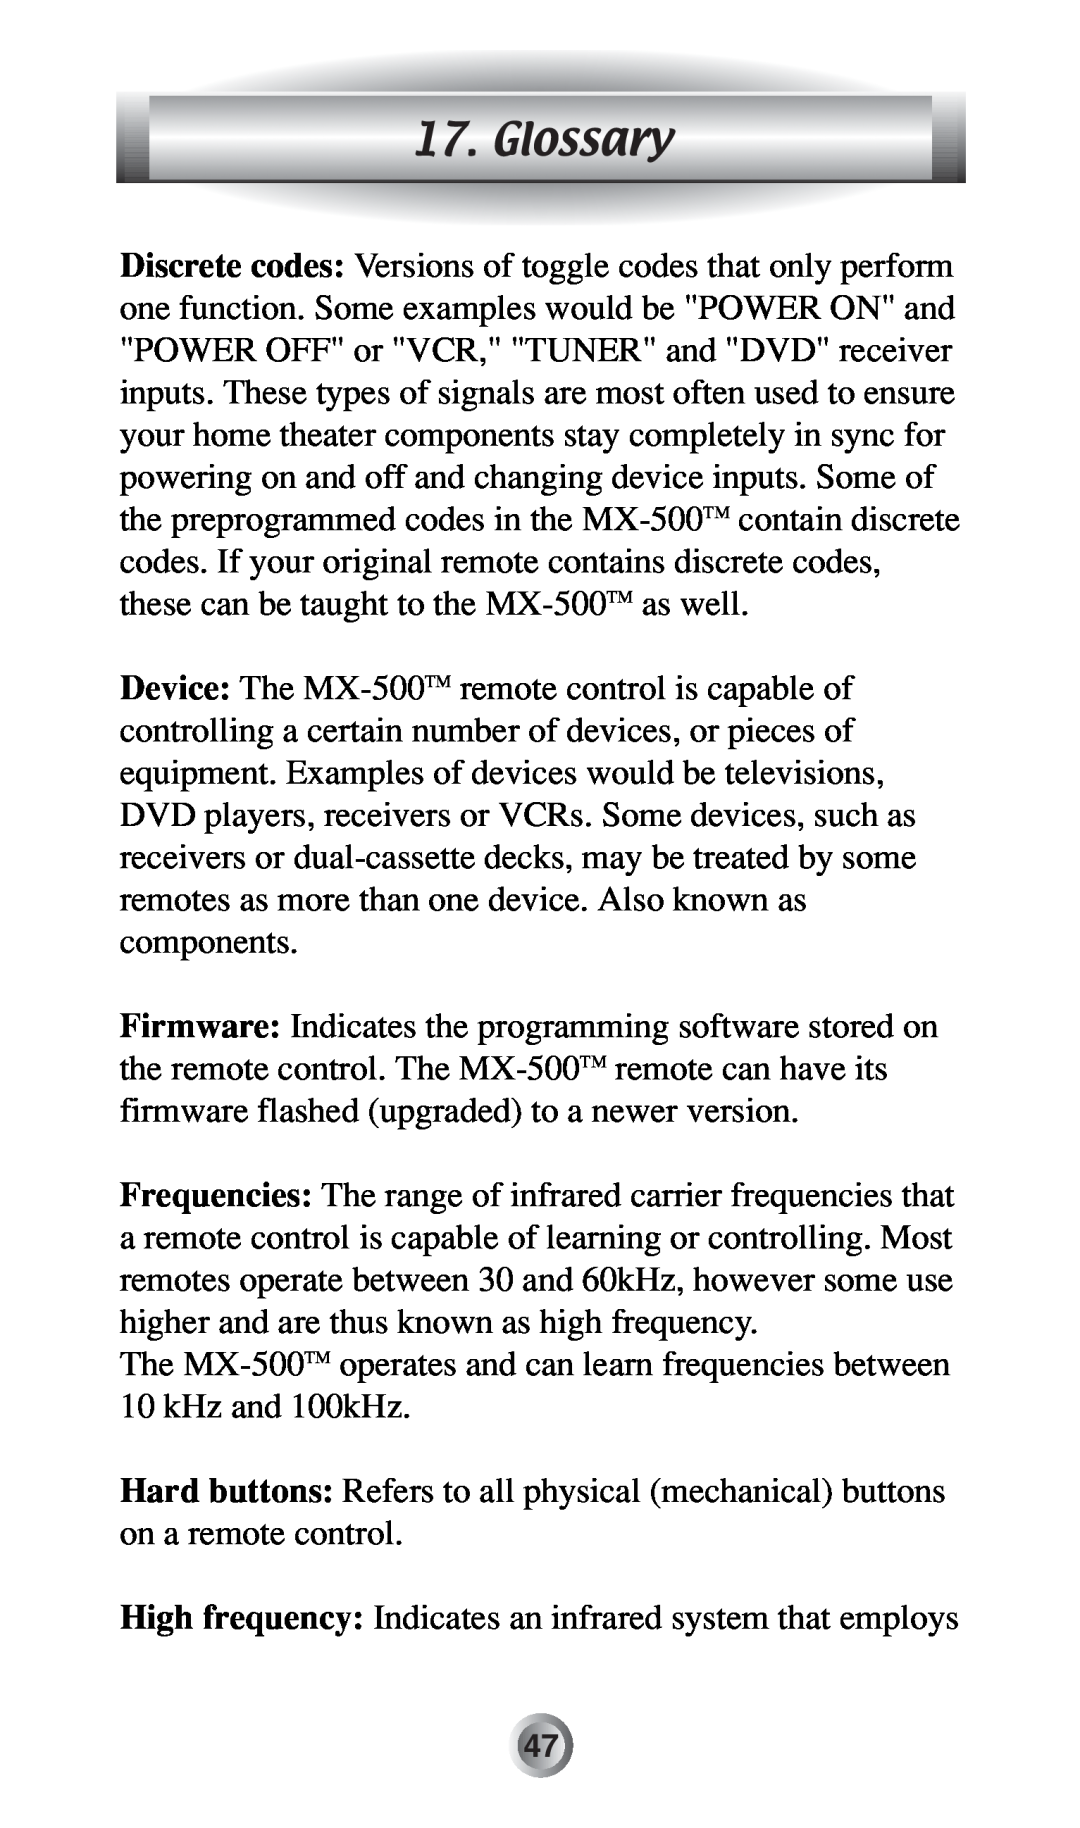 Radio Shack MX-500TM manual Glossary, High frequency Indicates an infrared system that employs 